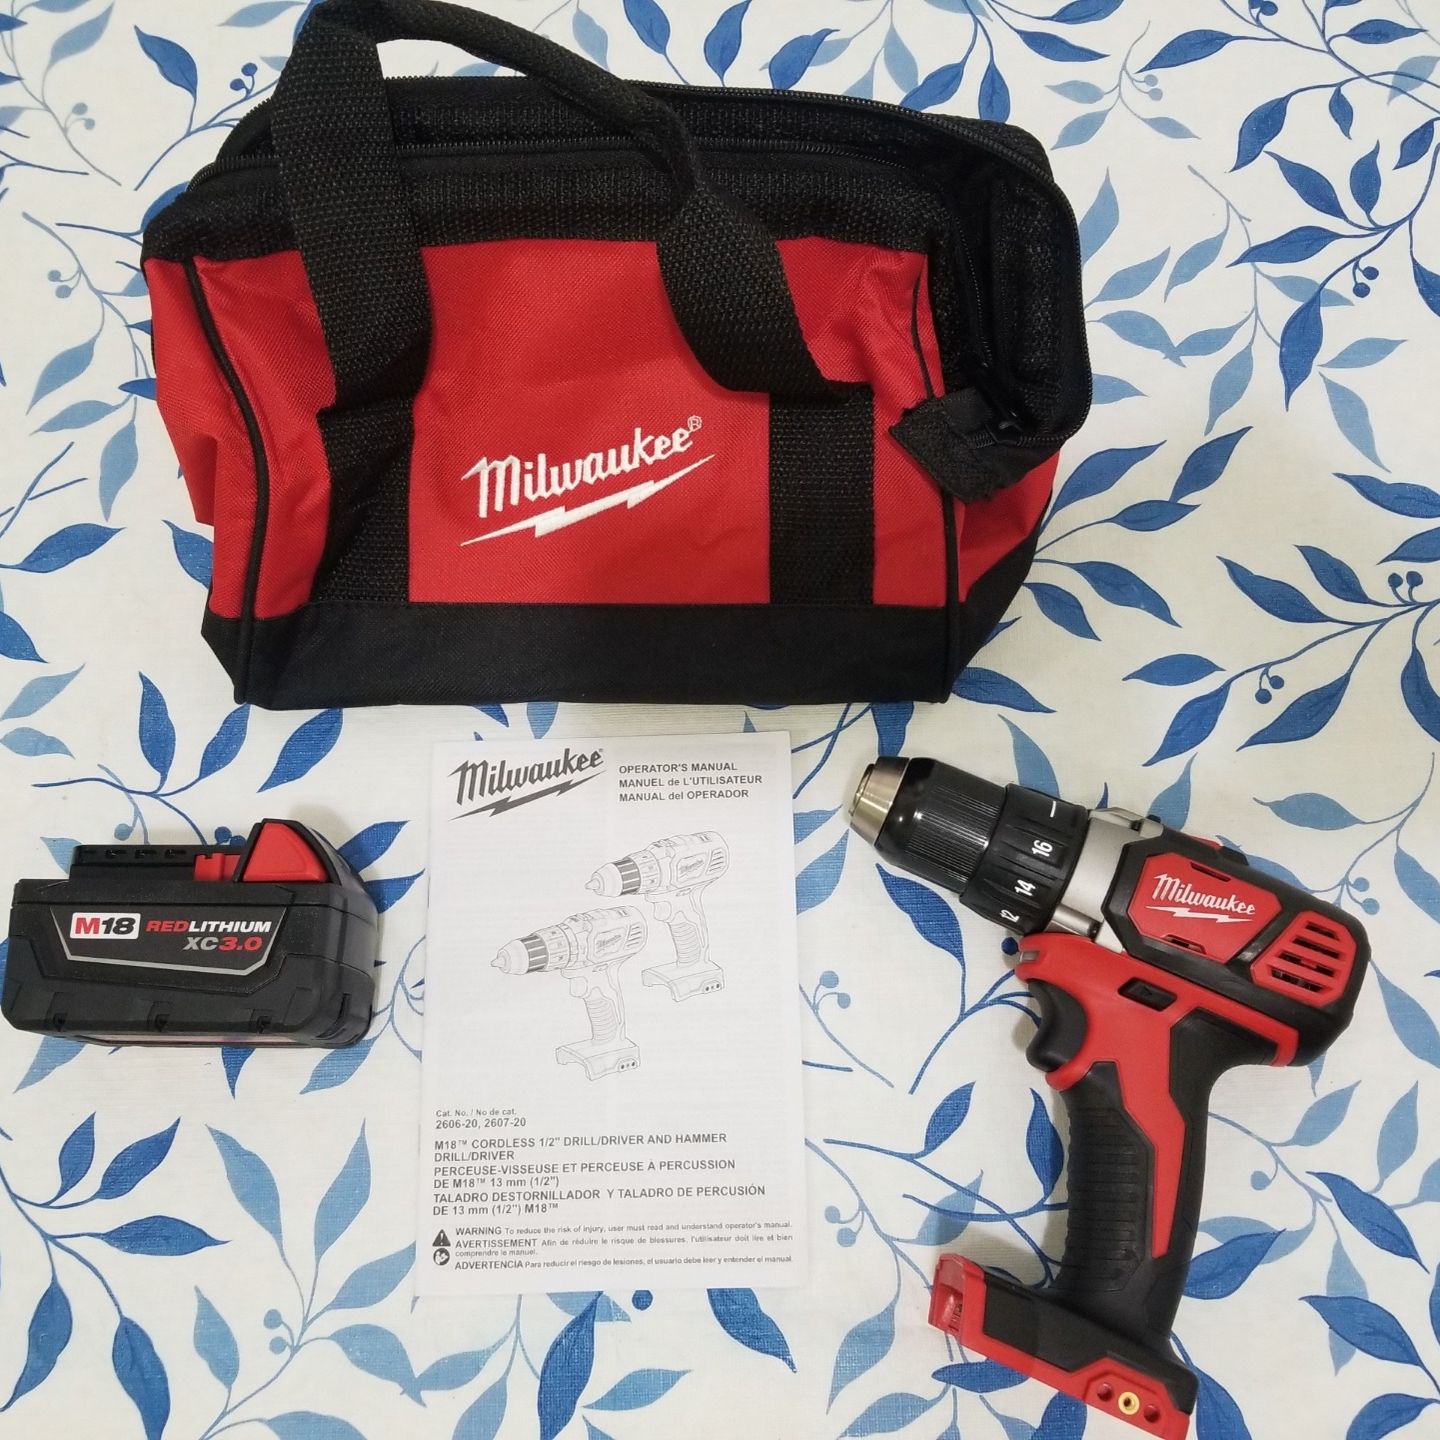 Milwaukee M18 18-Volt Cordless 1/2 in. Drill Driver (W/ Small Bag & 3.0 Battery)